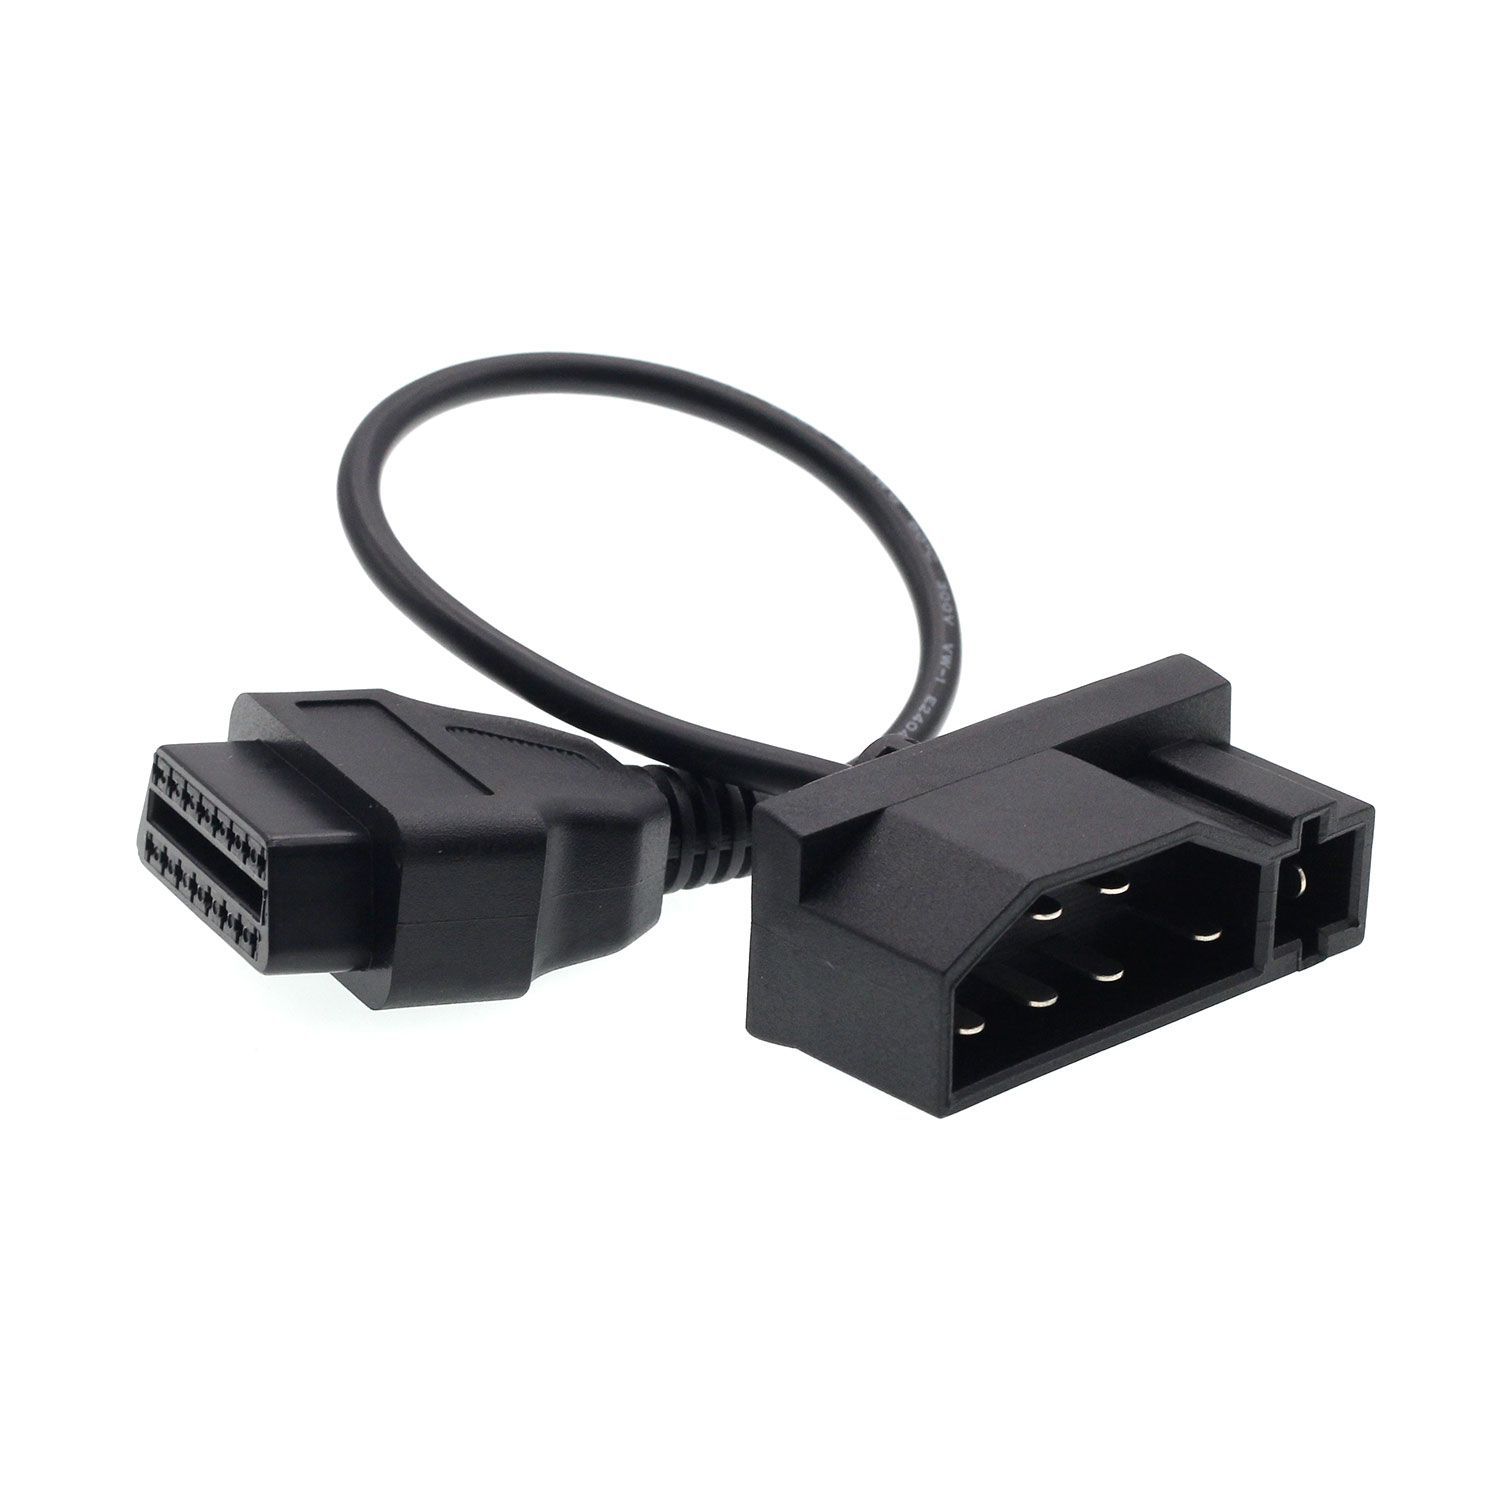 High Quality 7 Pin Male OBD1 to OBD2 OBDII 16 Pin Diagnostic Adapter Cable für Ford